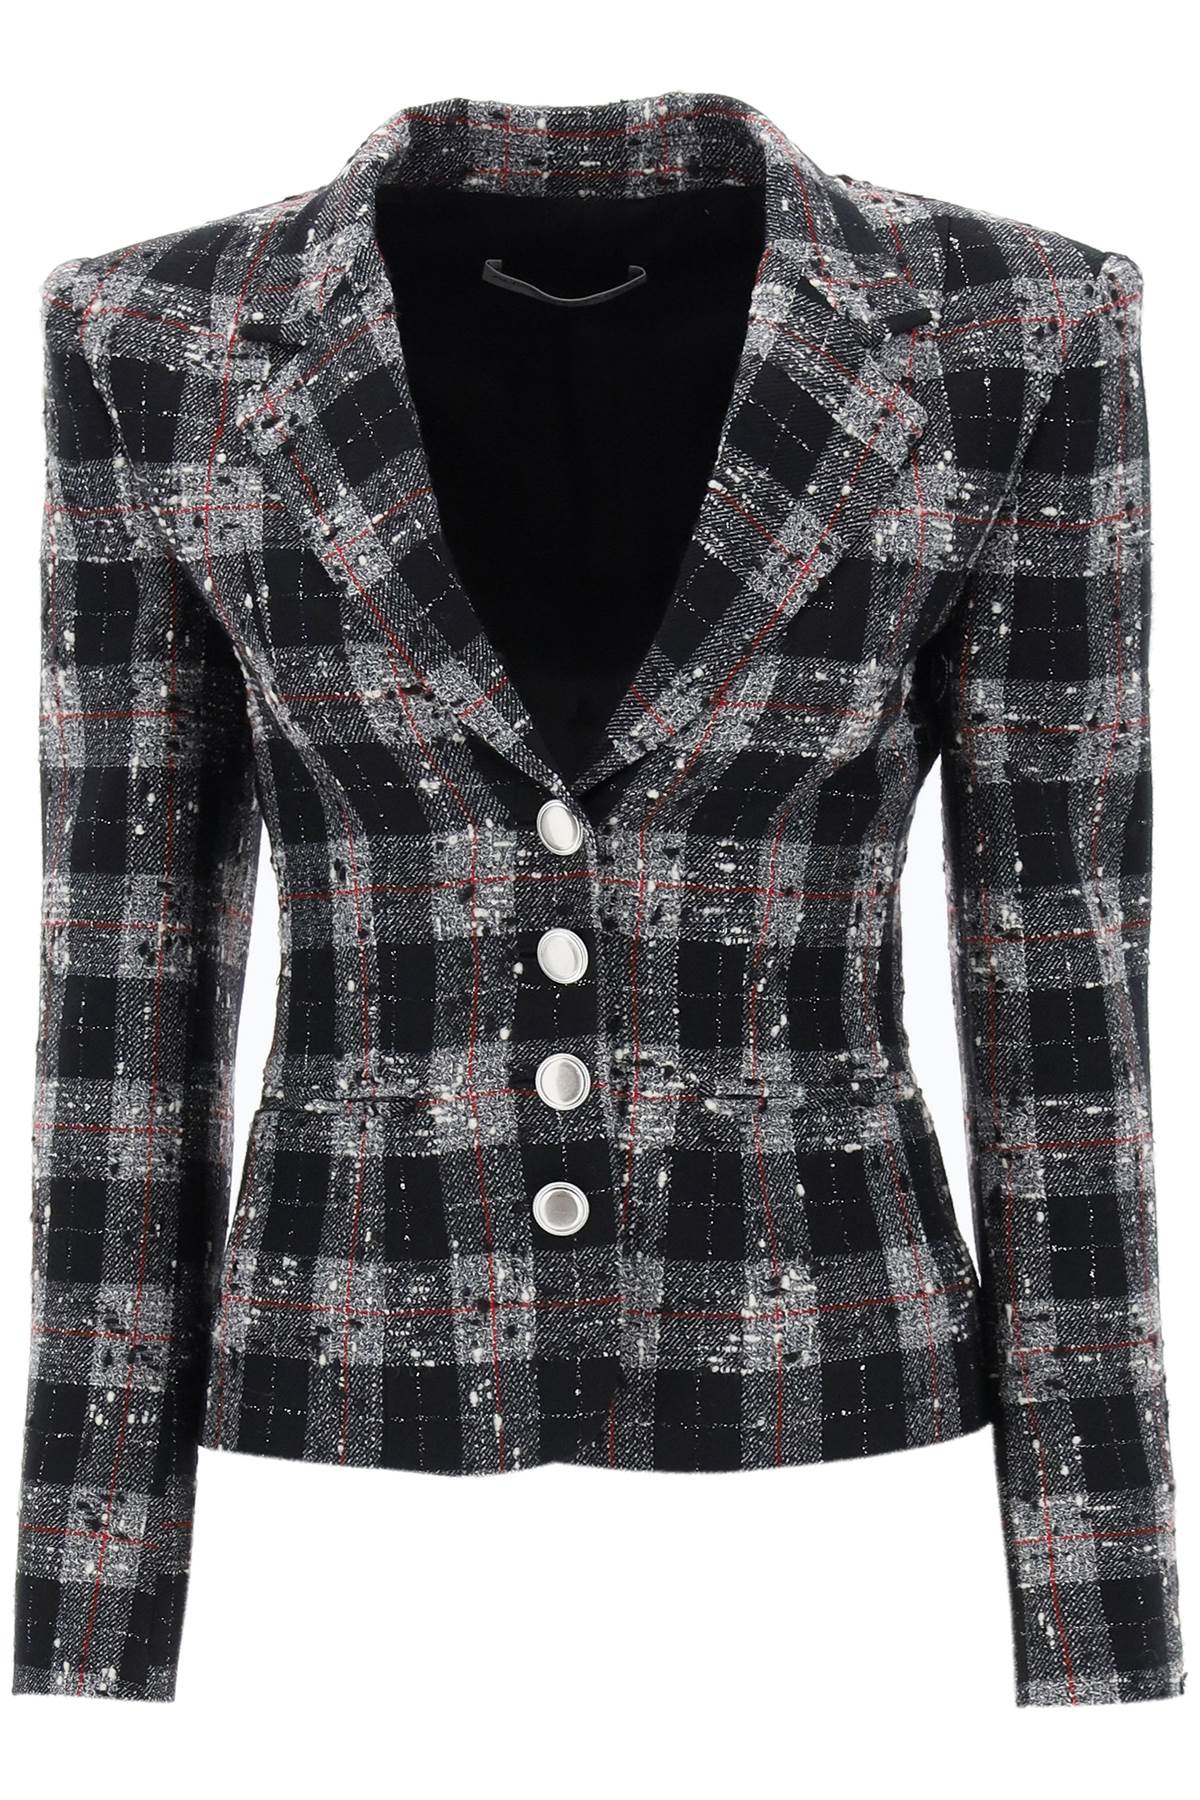 Alessandra rich single-breasted jacket in boucle' fabric with check motif-women > clothing > jackets > casual jackets-Alessandra Rich-42-Black-Urbanheer